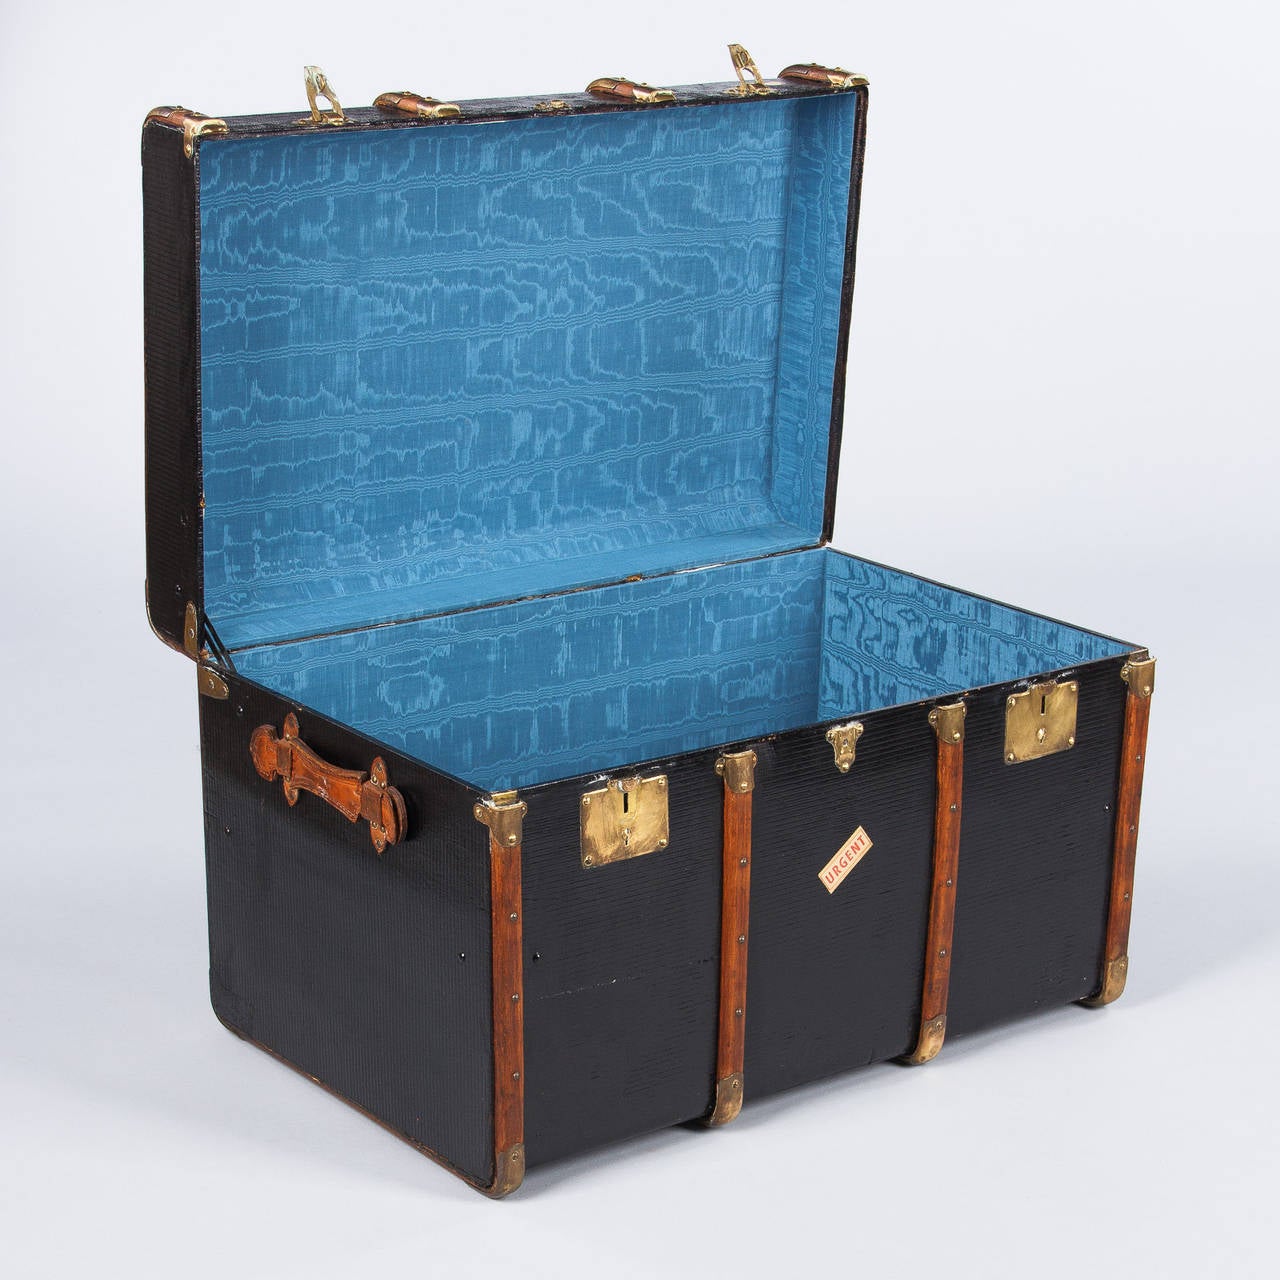 A wonderful traveling trunk from Lyon, France from the early 1900s. The trunk is made of poplar covered with black oil cloth. The lock plates are brass and the handles are made of leather. The trunk has a brass plaque on top with the original